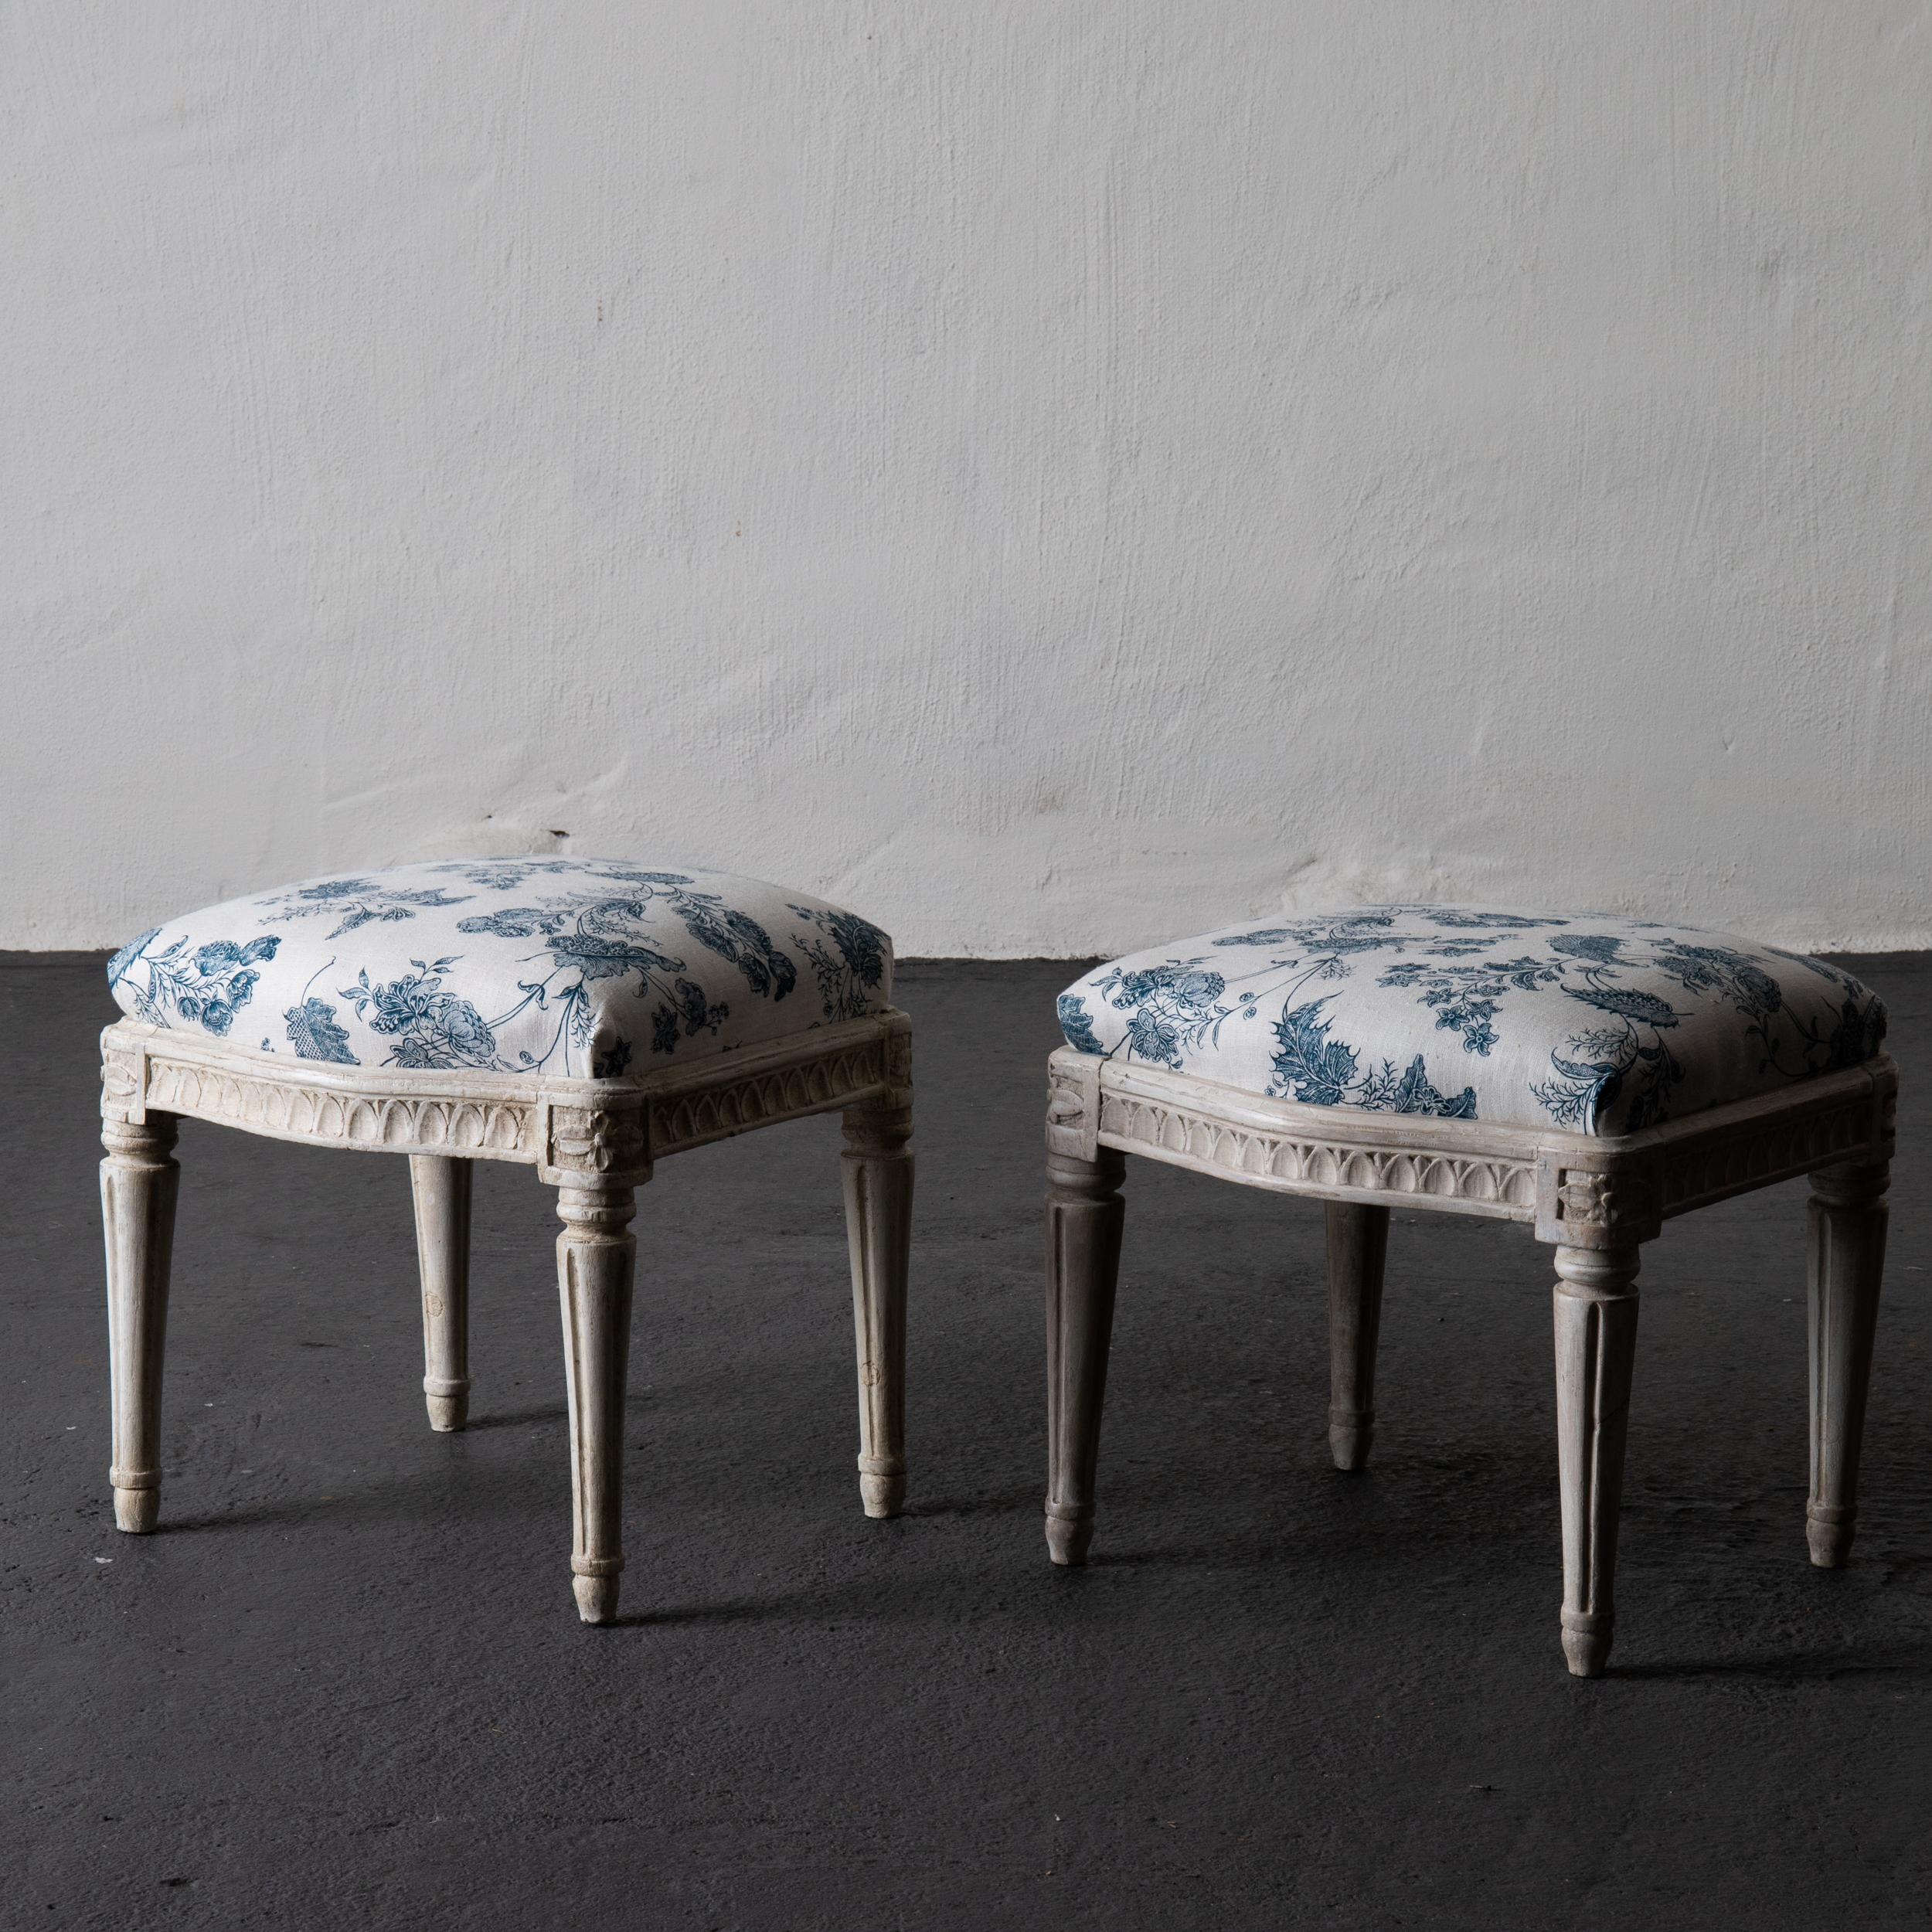 A pair of stools made during the early Gustavian period in Sweden, circa 1780-1790. Semi curved frieze decorated with carved leaf tips. Rounded and channeled legs. One of the stools have the Royal HGK mark. Upholstered in a blue and white floral